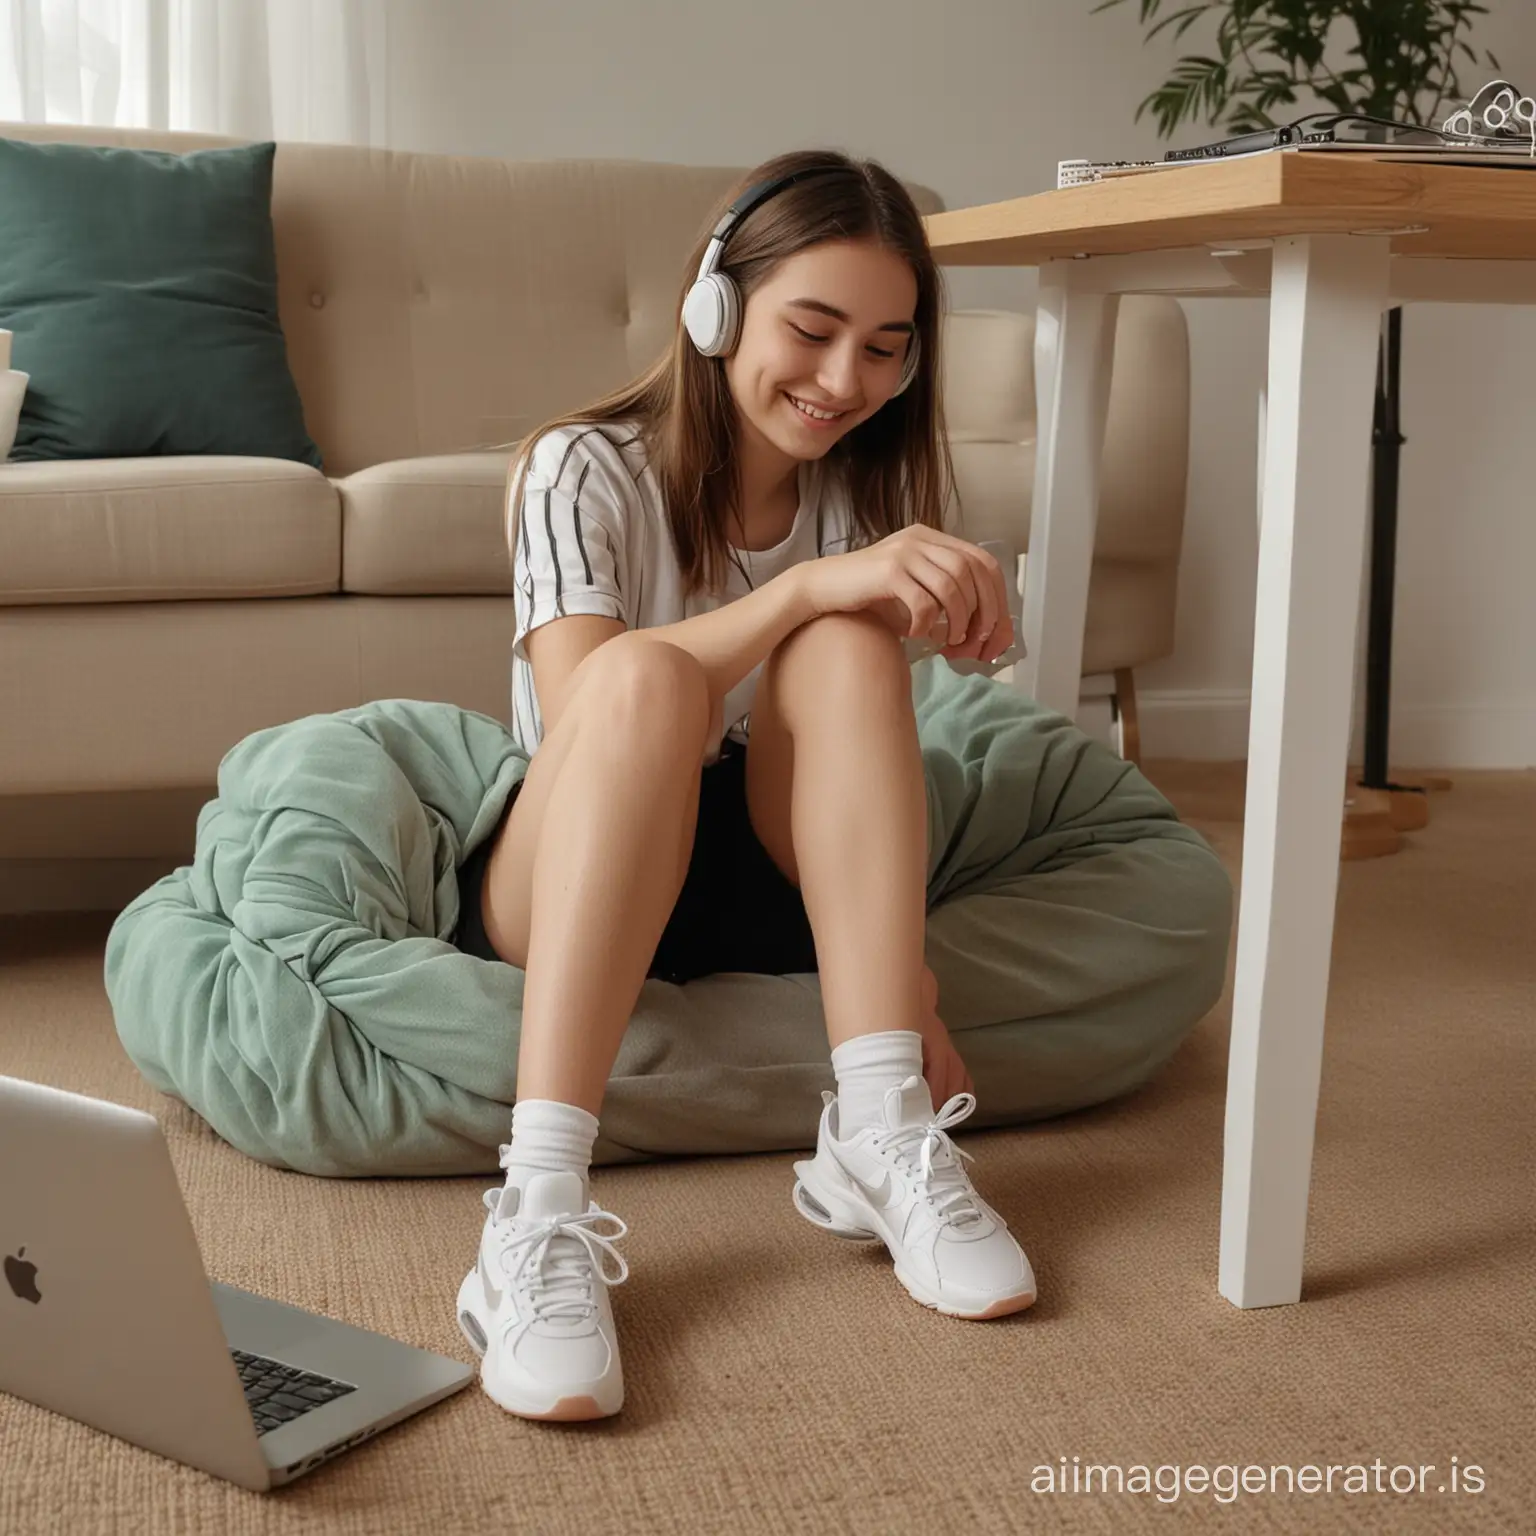 Teen-Girls-Enjoying-Relaxing-Time-with-Technology-and-Playful-Moments